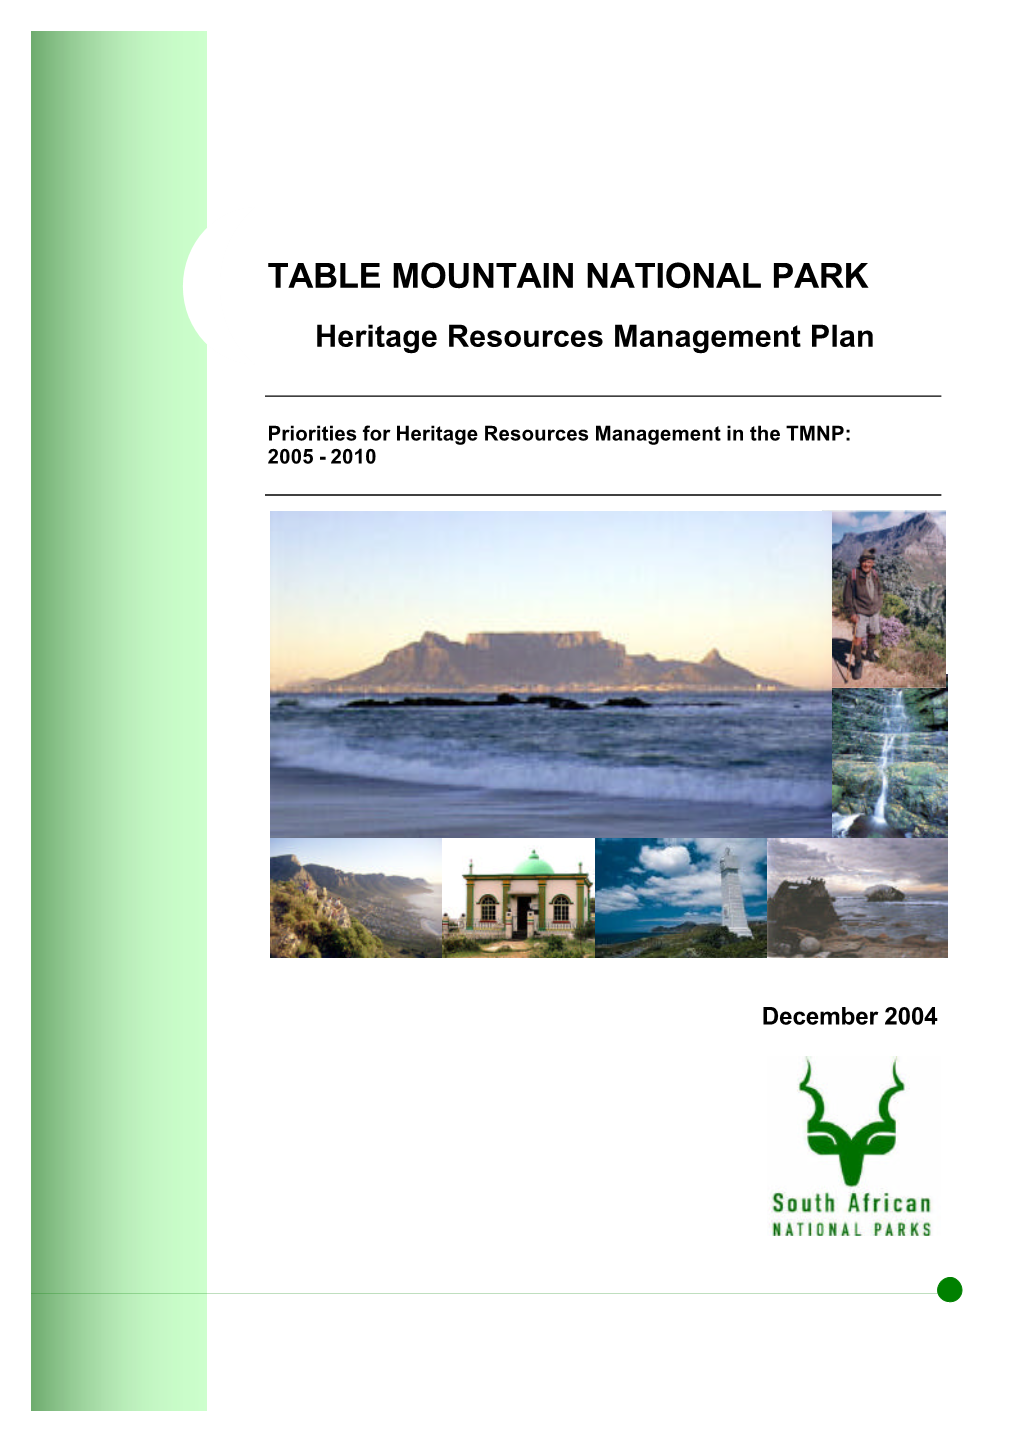 TABLE MOUNTAIN NATIONAL PARK Heritage Resources Management Plan